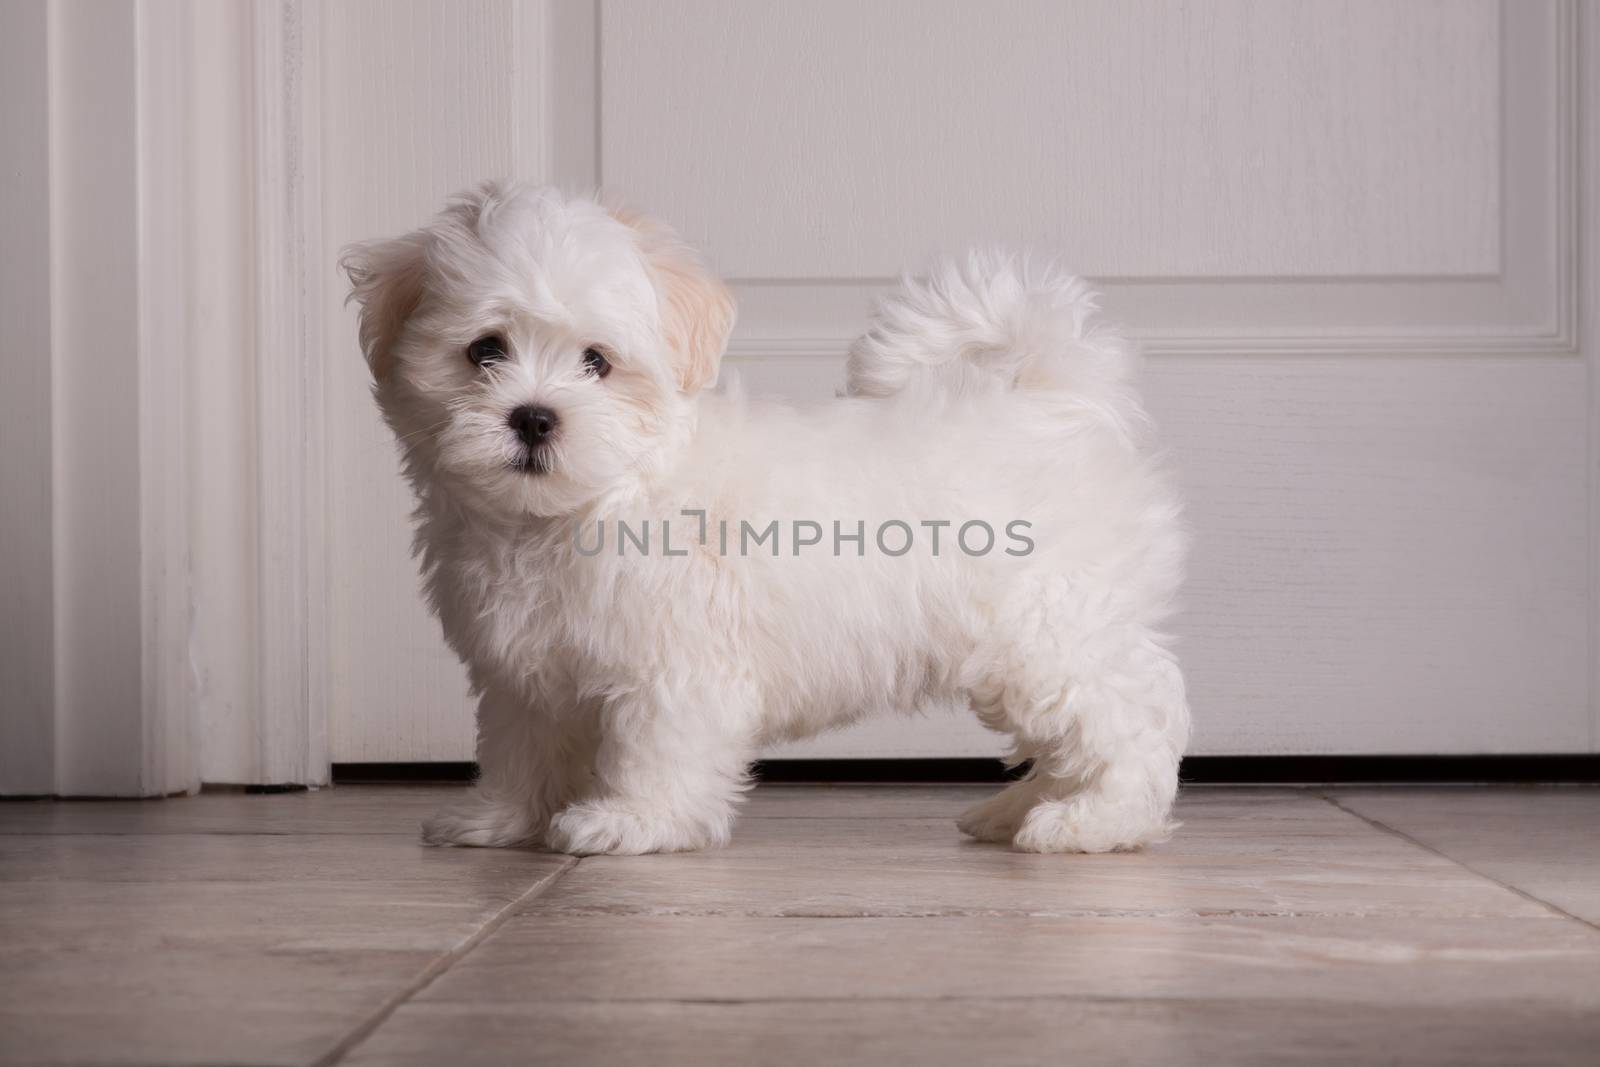 Adorable two months white Shih tzu puppy by lanalanglois